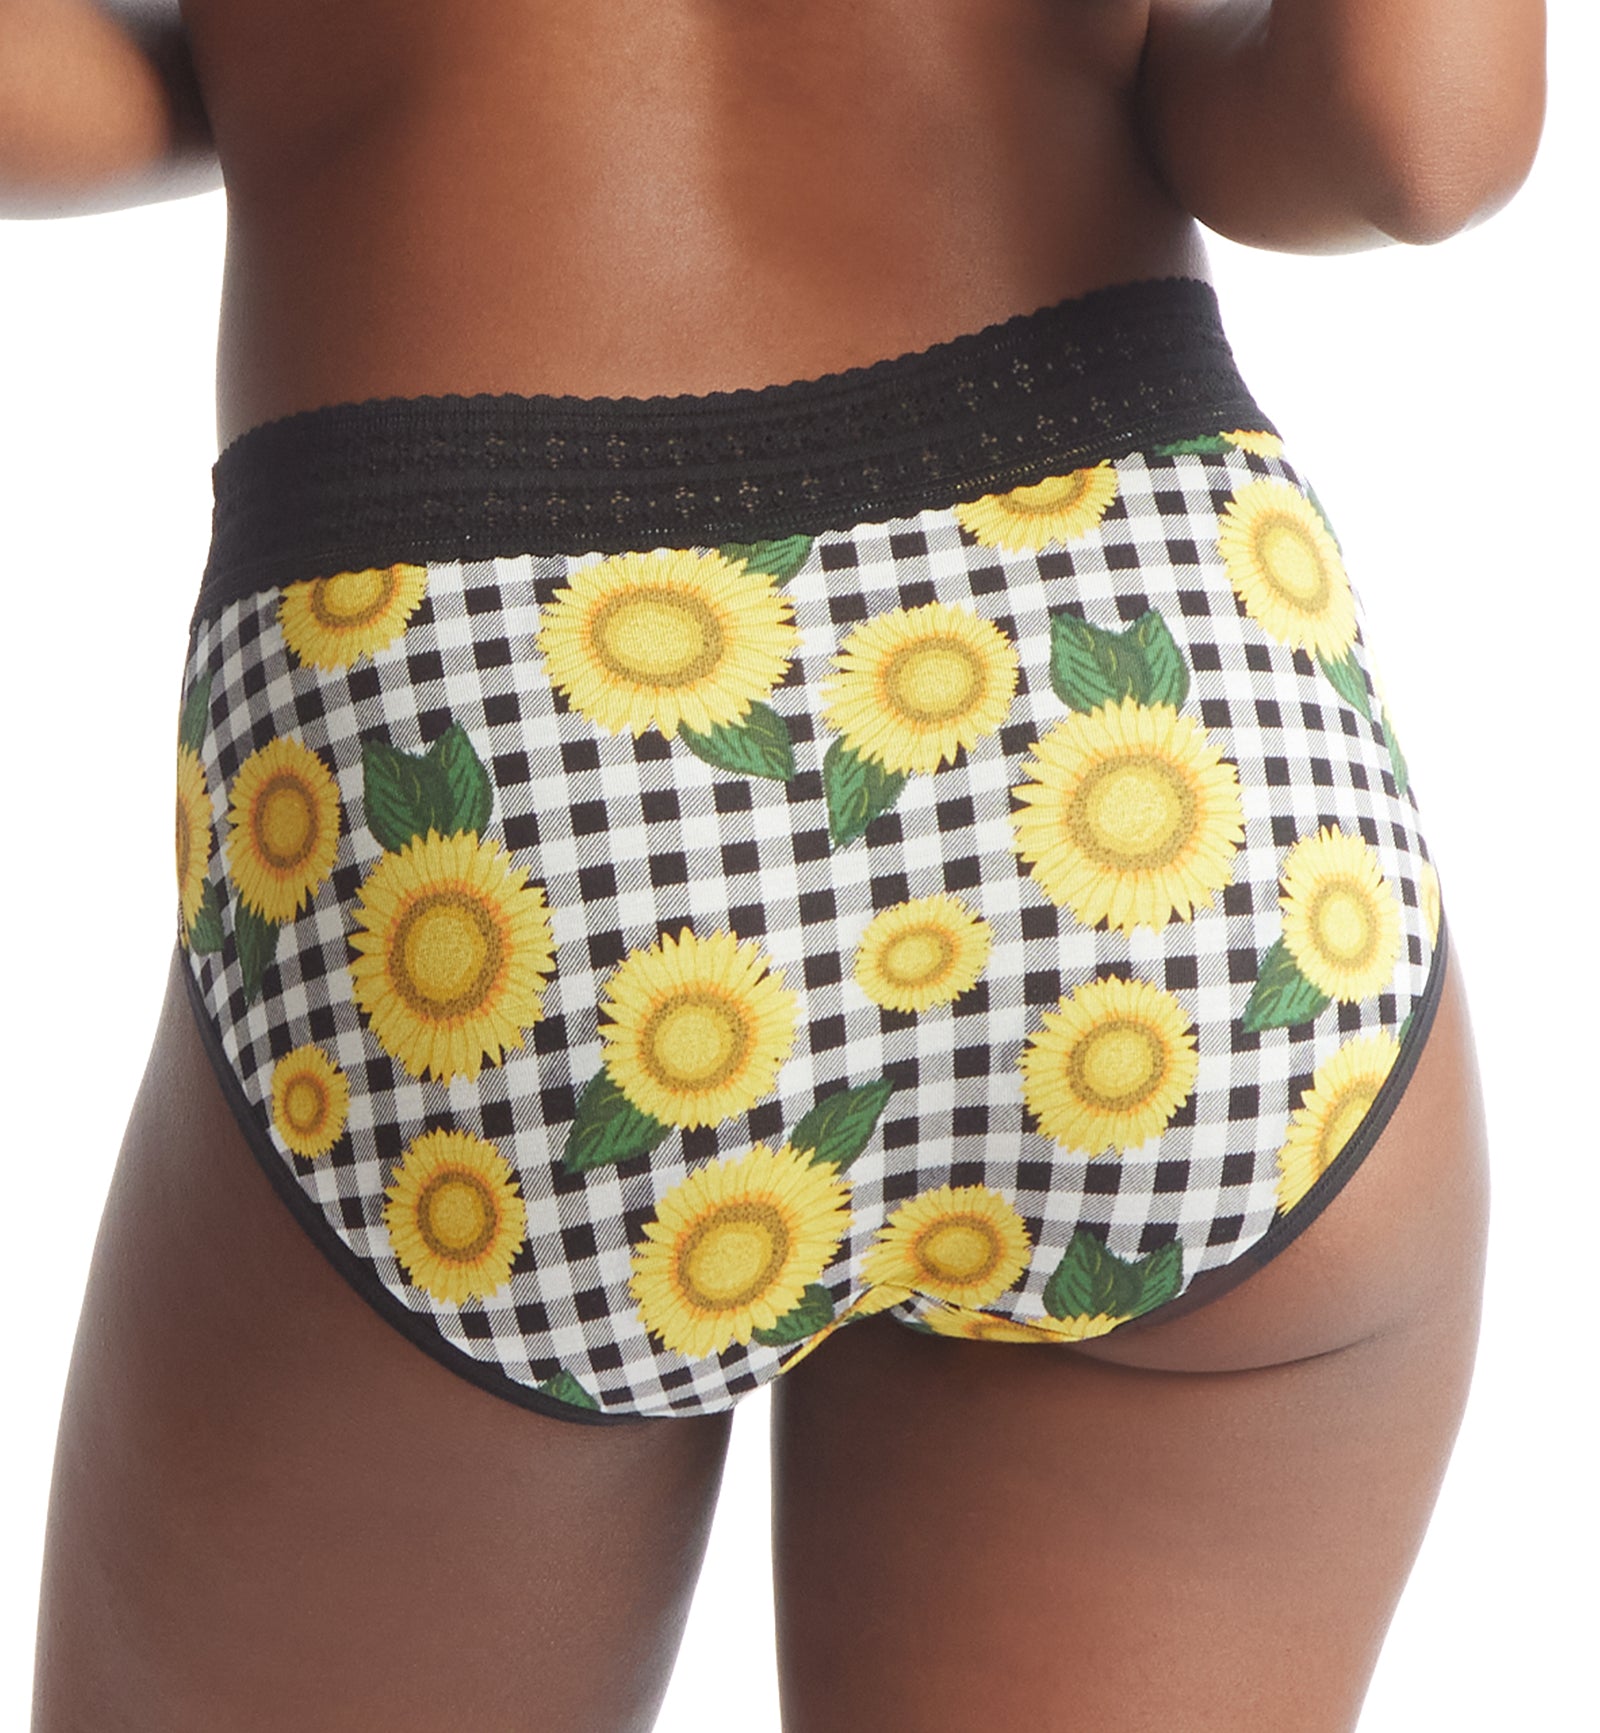 Hanky Panky DreamEase Printed French Brief (PR682464),Small,Fields of Gold - Fields of Gold,Small